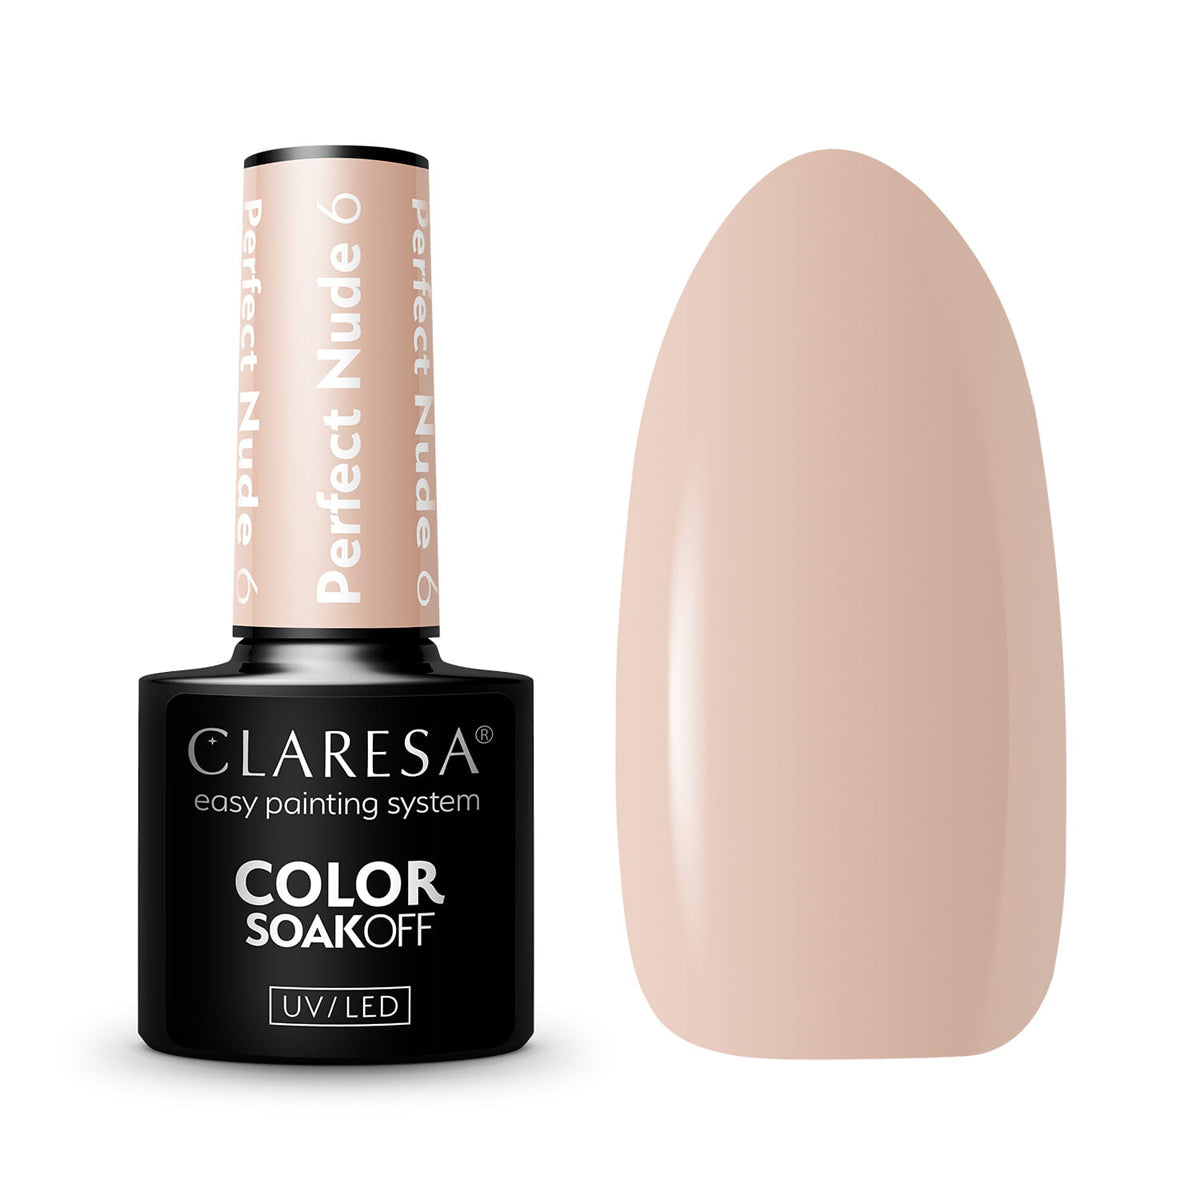 CLARESA Vernis à ongles hybride PERFECT NUDE 6 -5g